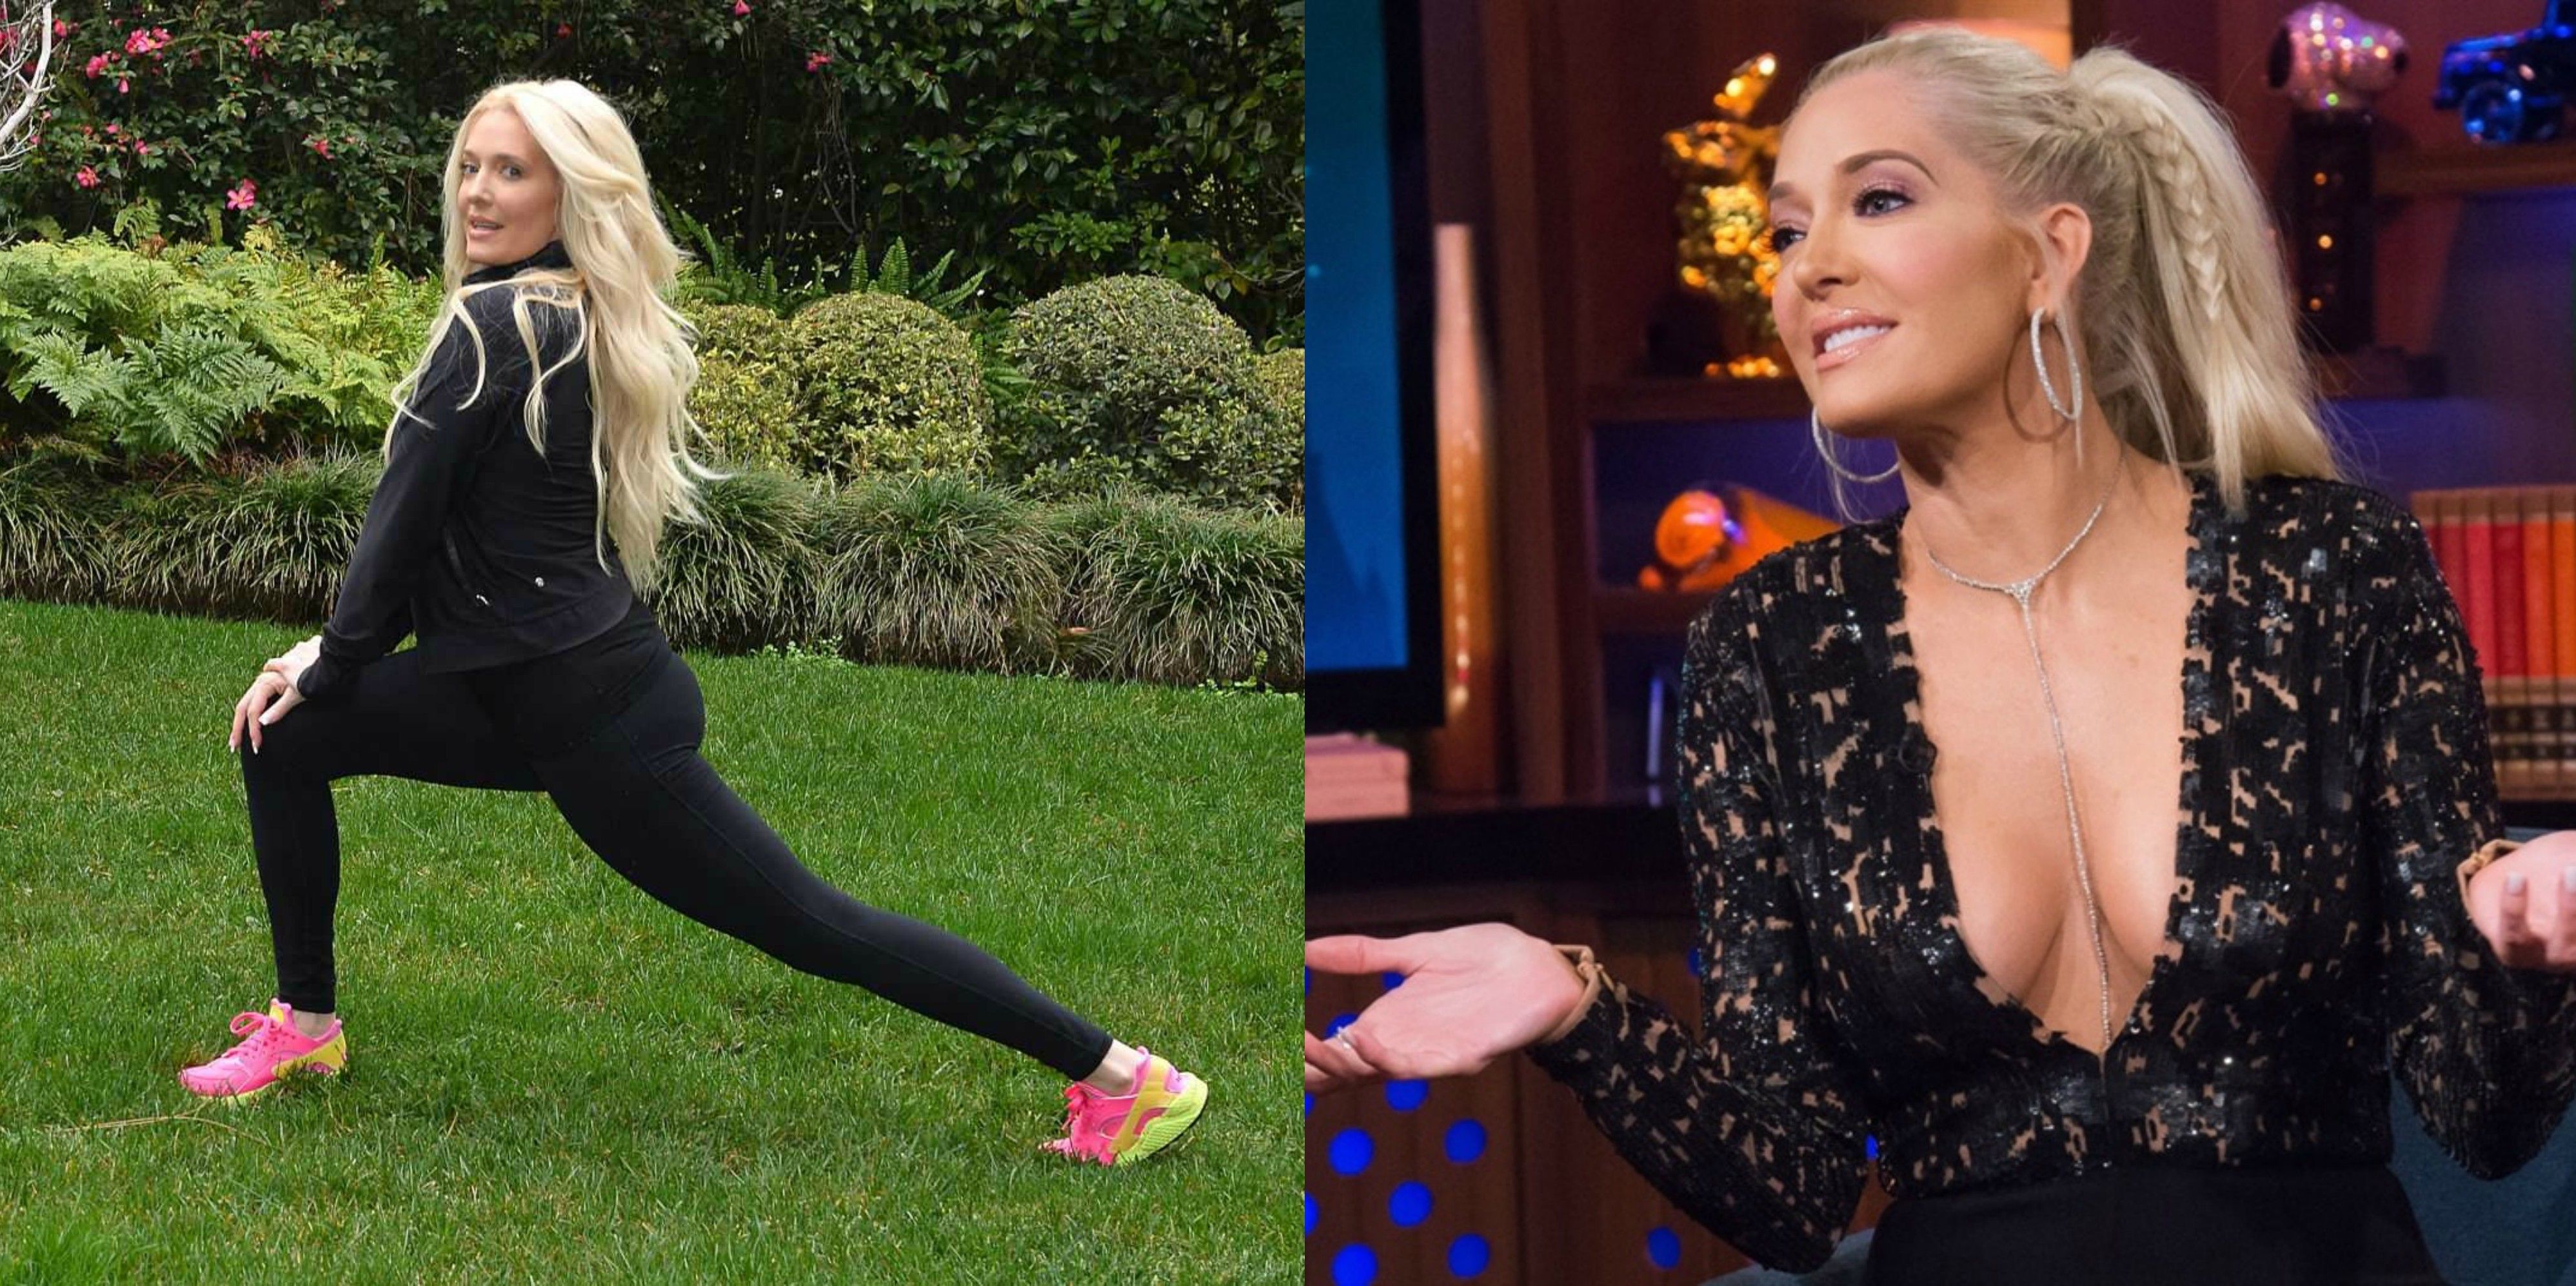 15 Photos That Prove Erika Jayne Is The Hottest Housewife On TV.